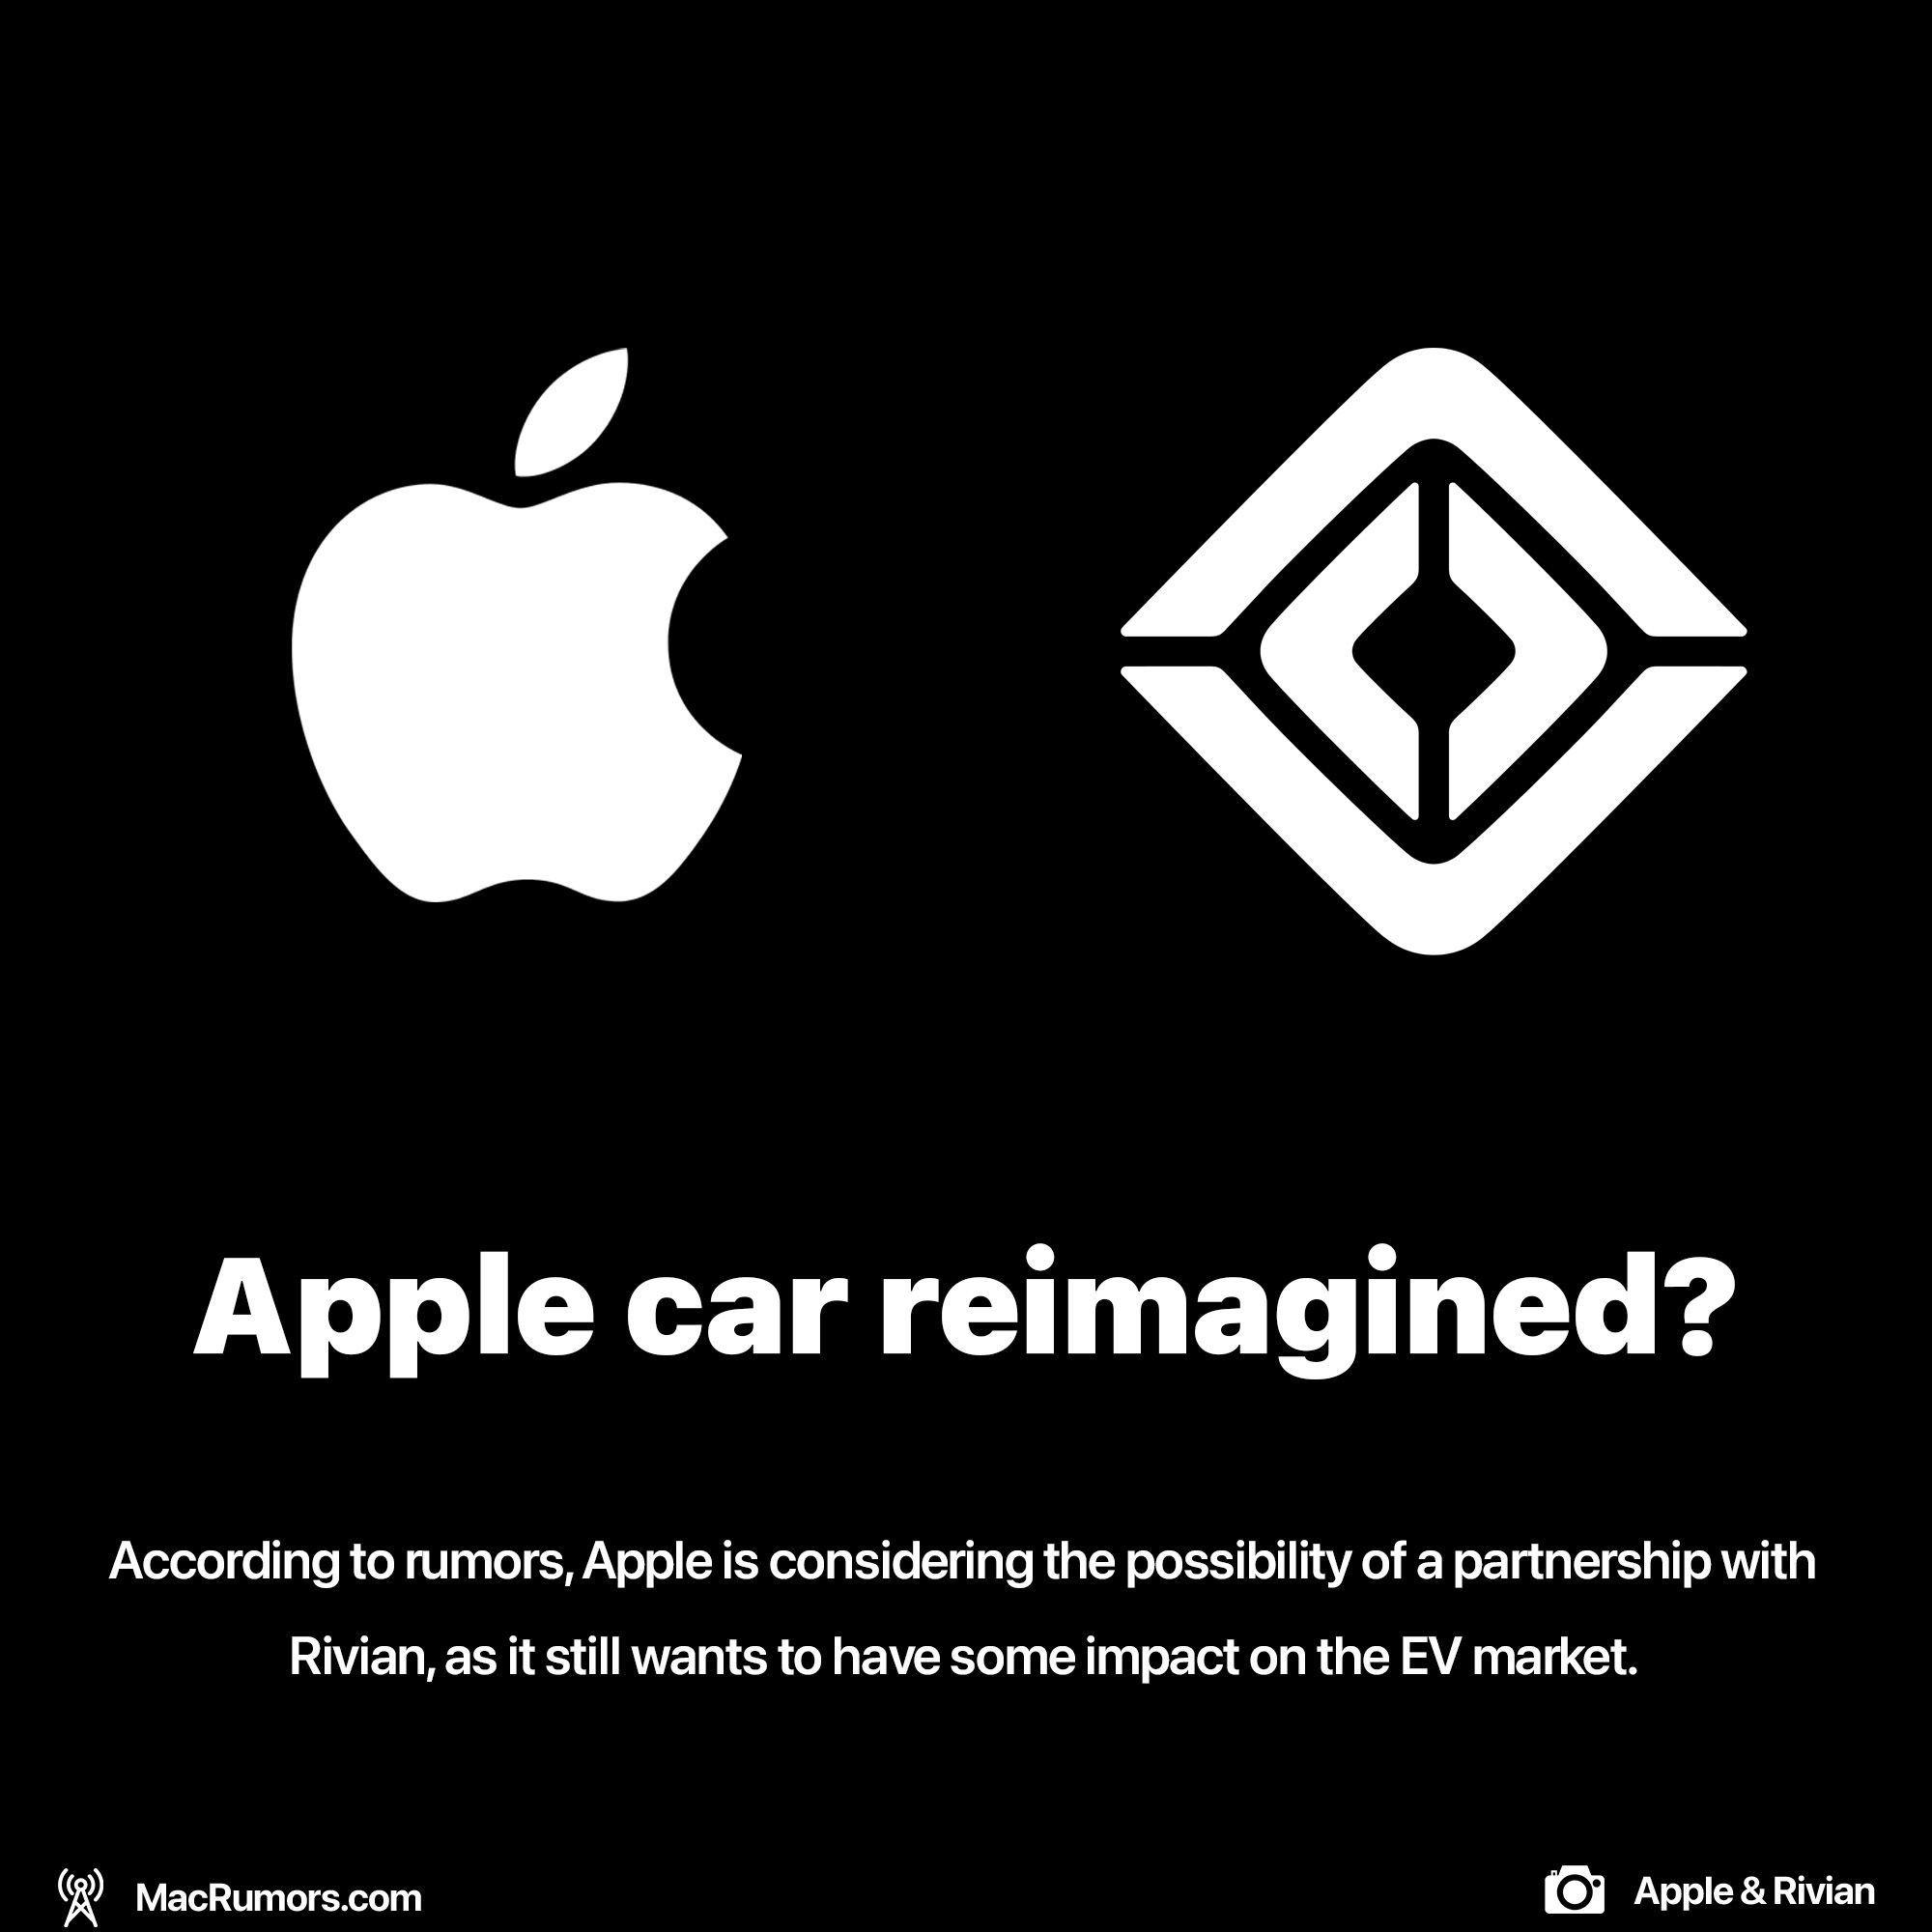 Apple & Rivian working together?